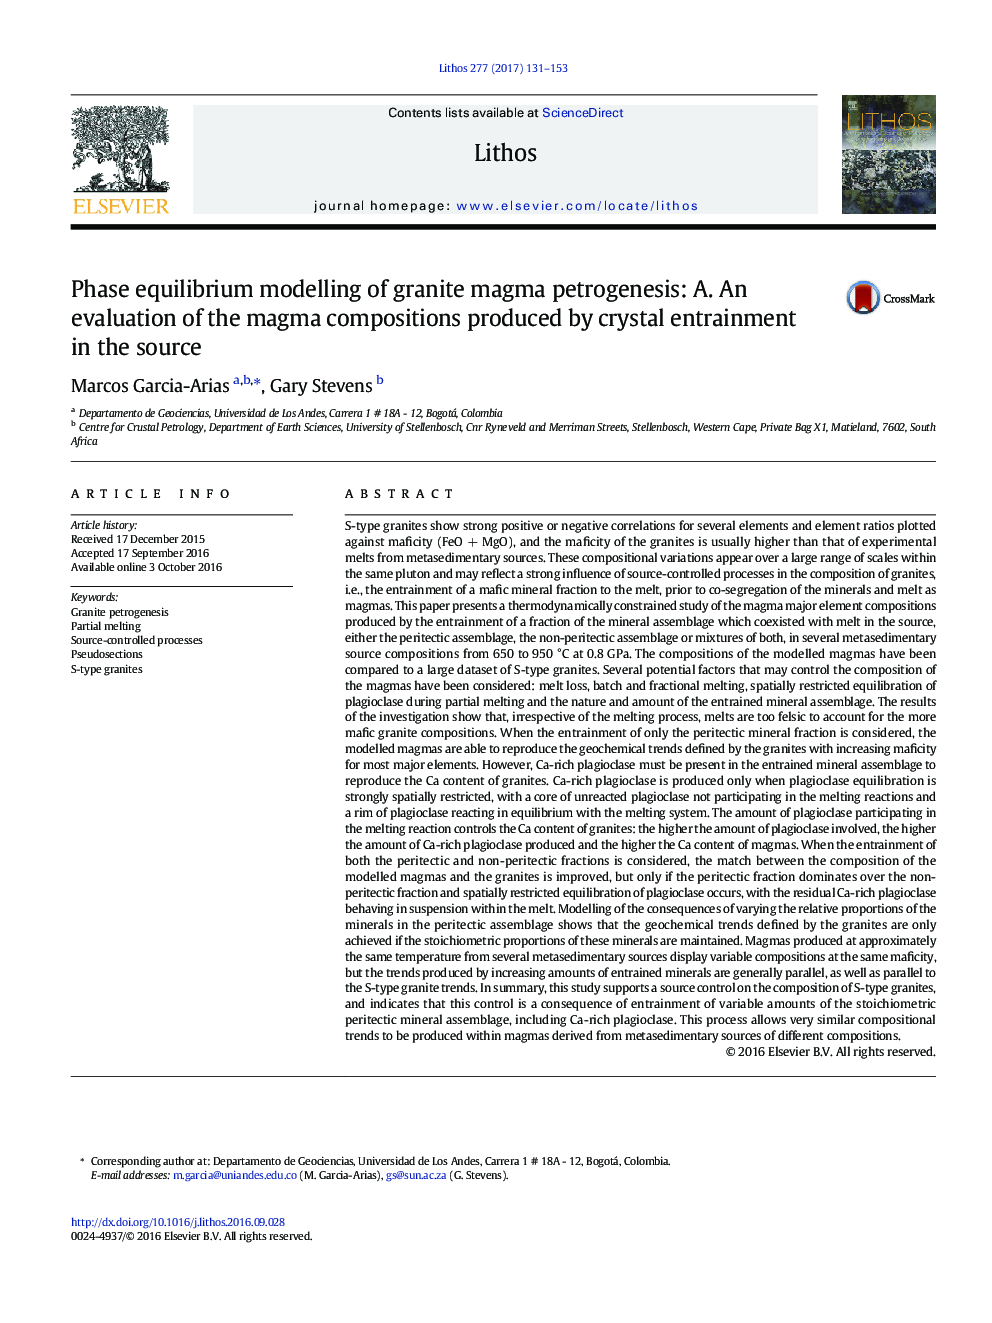 Phase equilibrium modelling of granite magma petrogenesis: A. An evaluation of the magma compositions produced by crystal entrainment in the source